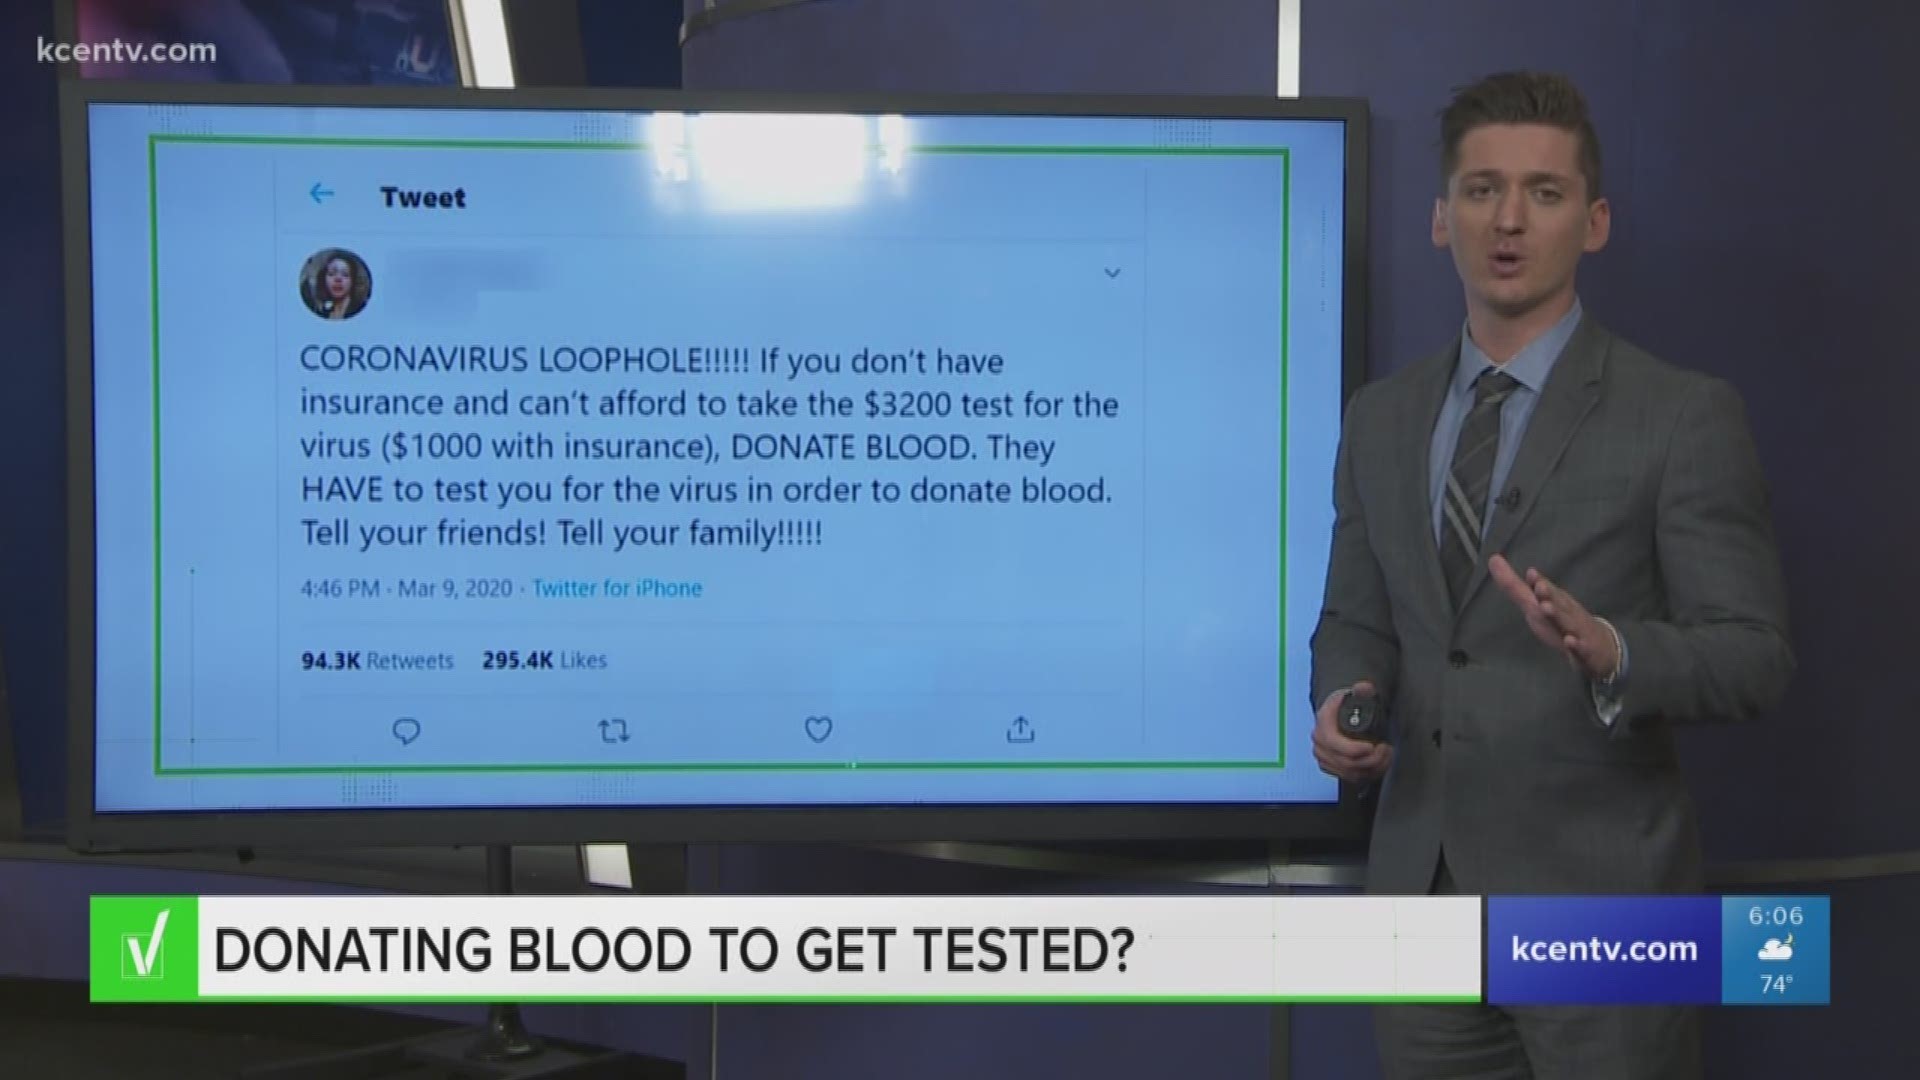 The question came after a since-deleted post on Twitter claimed people could avoid the coronavirus test fee by donating blood.